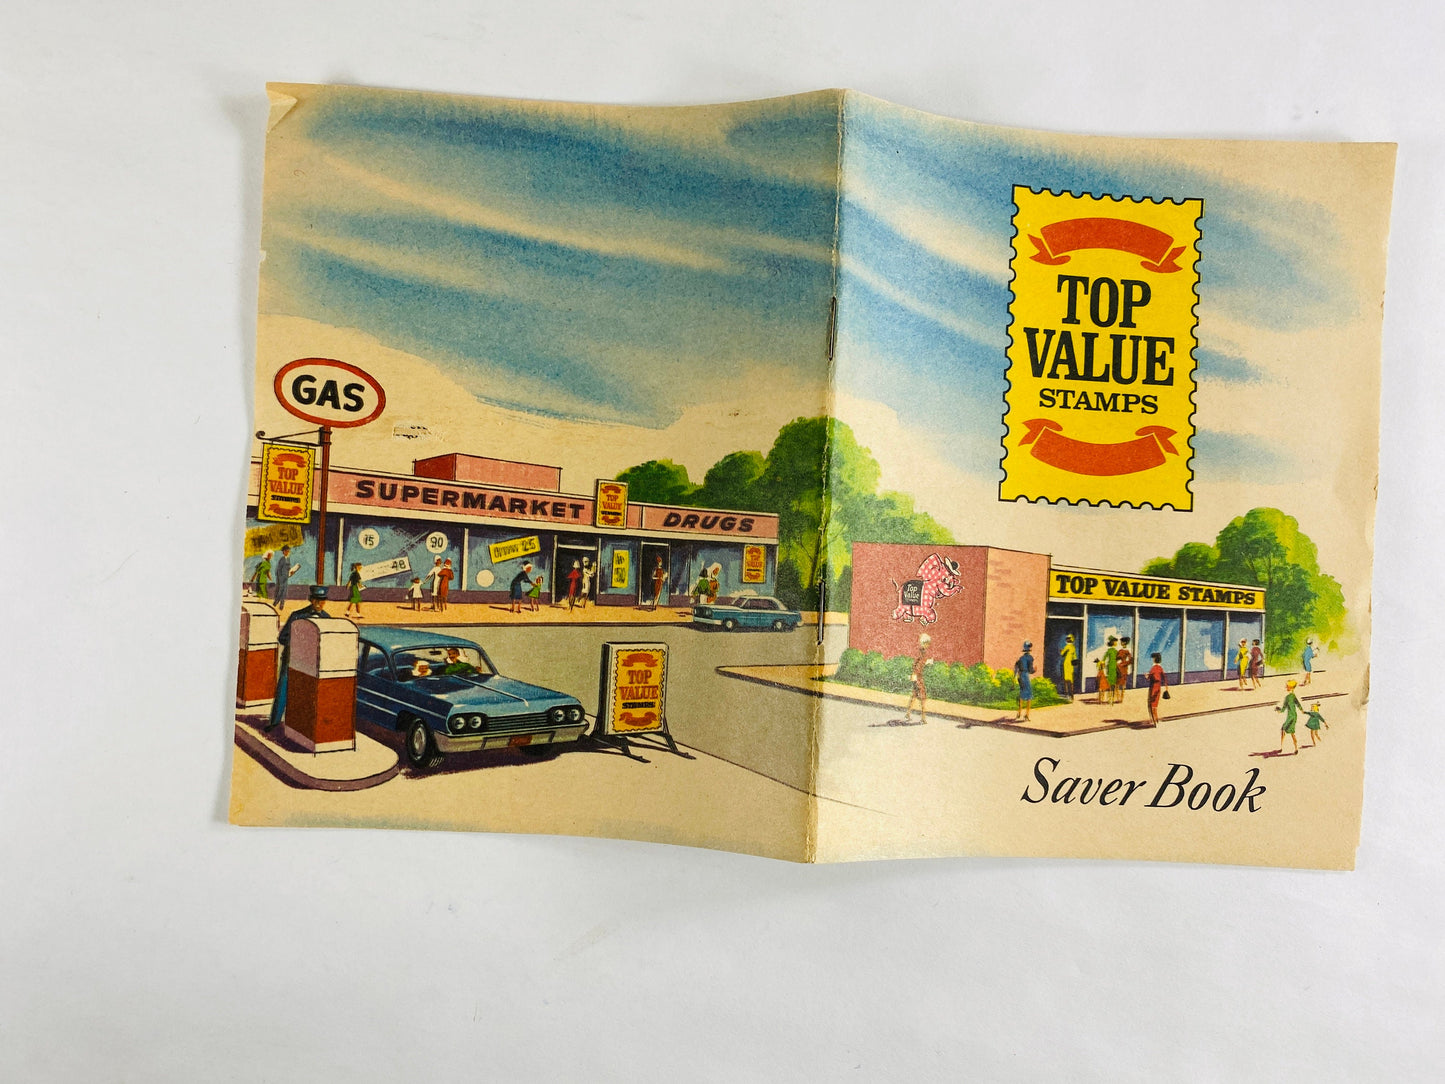 Authentic Top Value Green Stamps Saver booklet with pasted stamps by Top Saver circa 1966. Grocery Store coupons 1960s prop staging decor